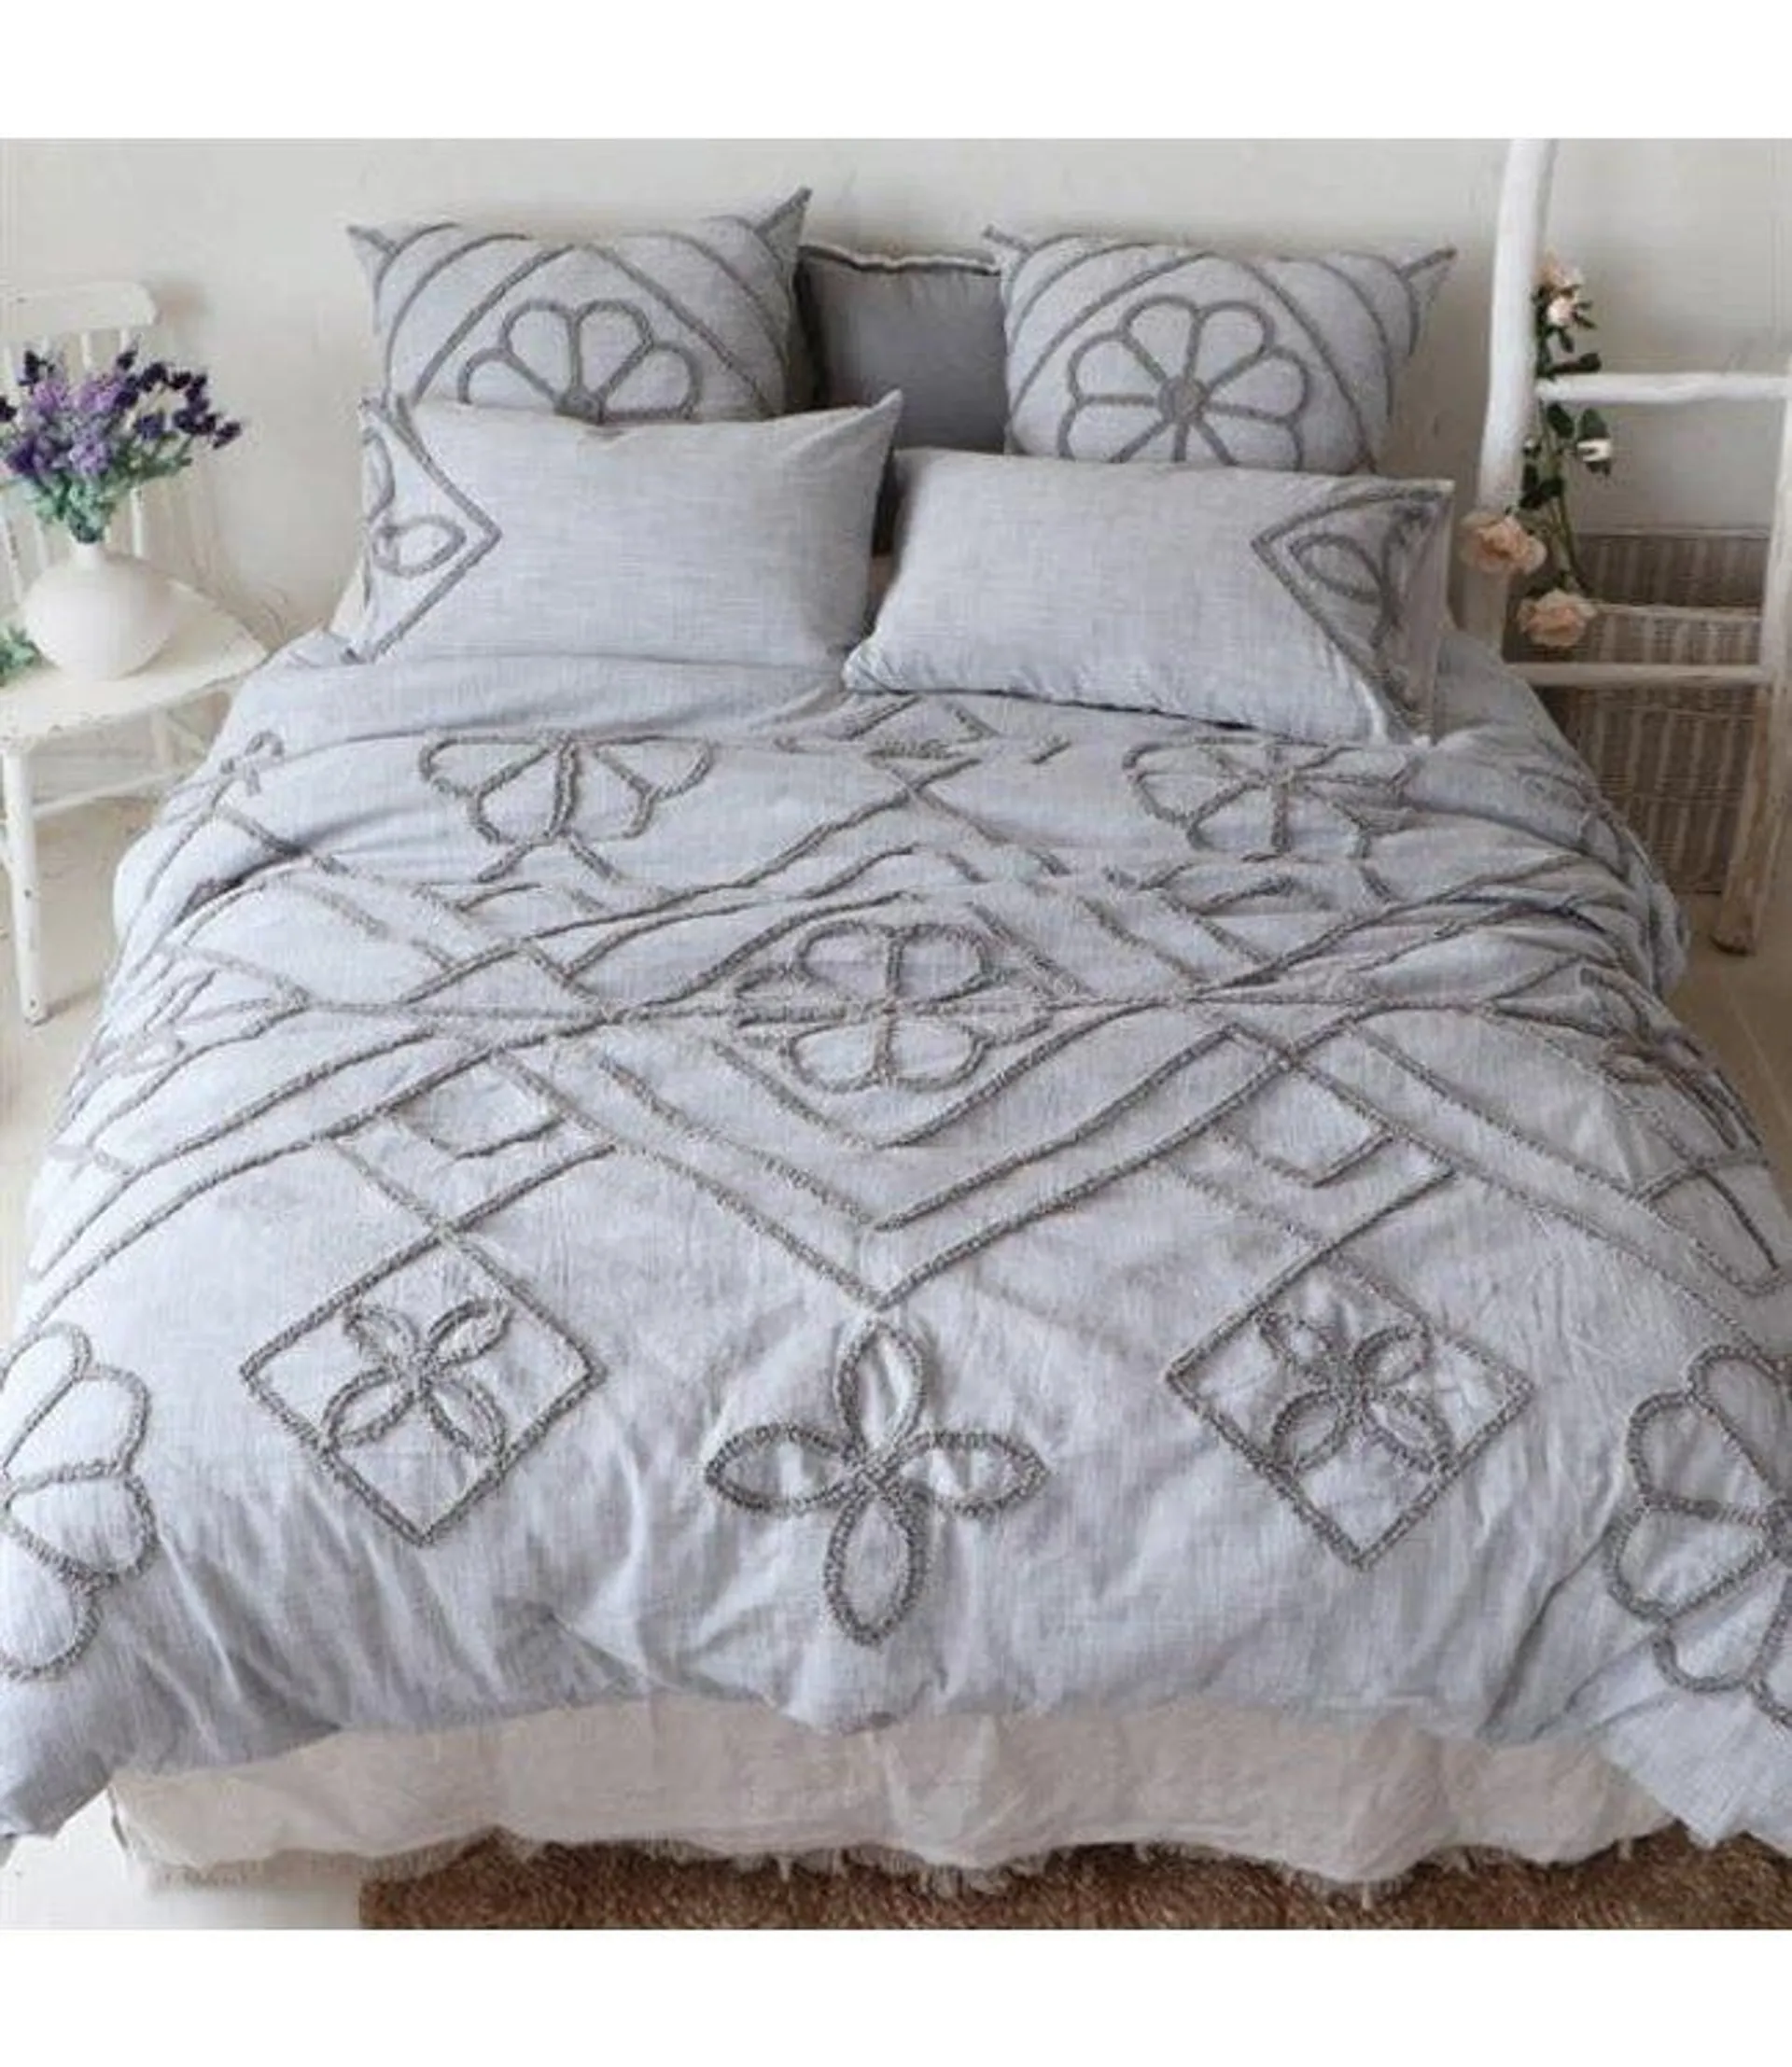 SIDONIE TUFTED GREY DUVET COVER